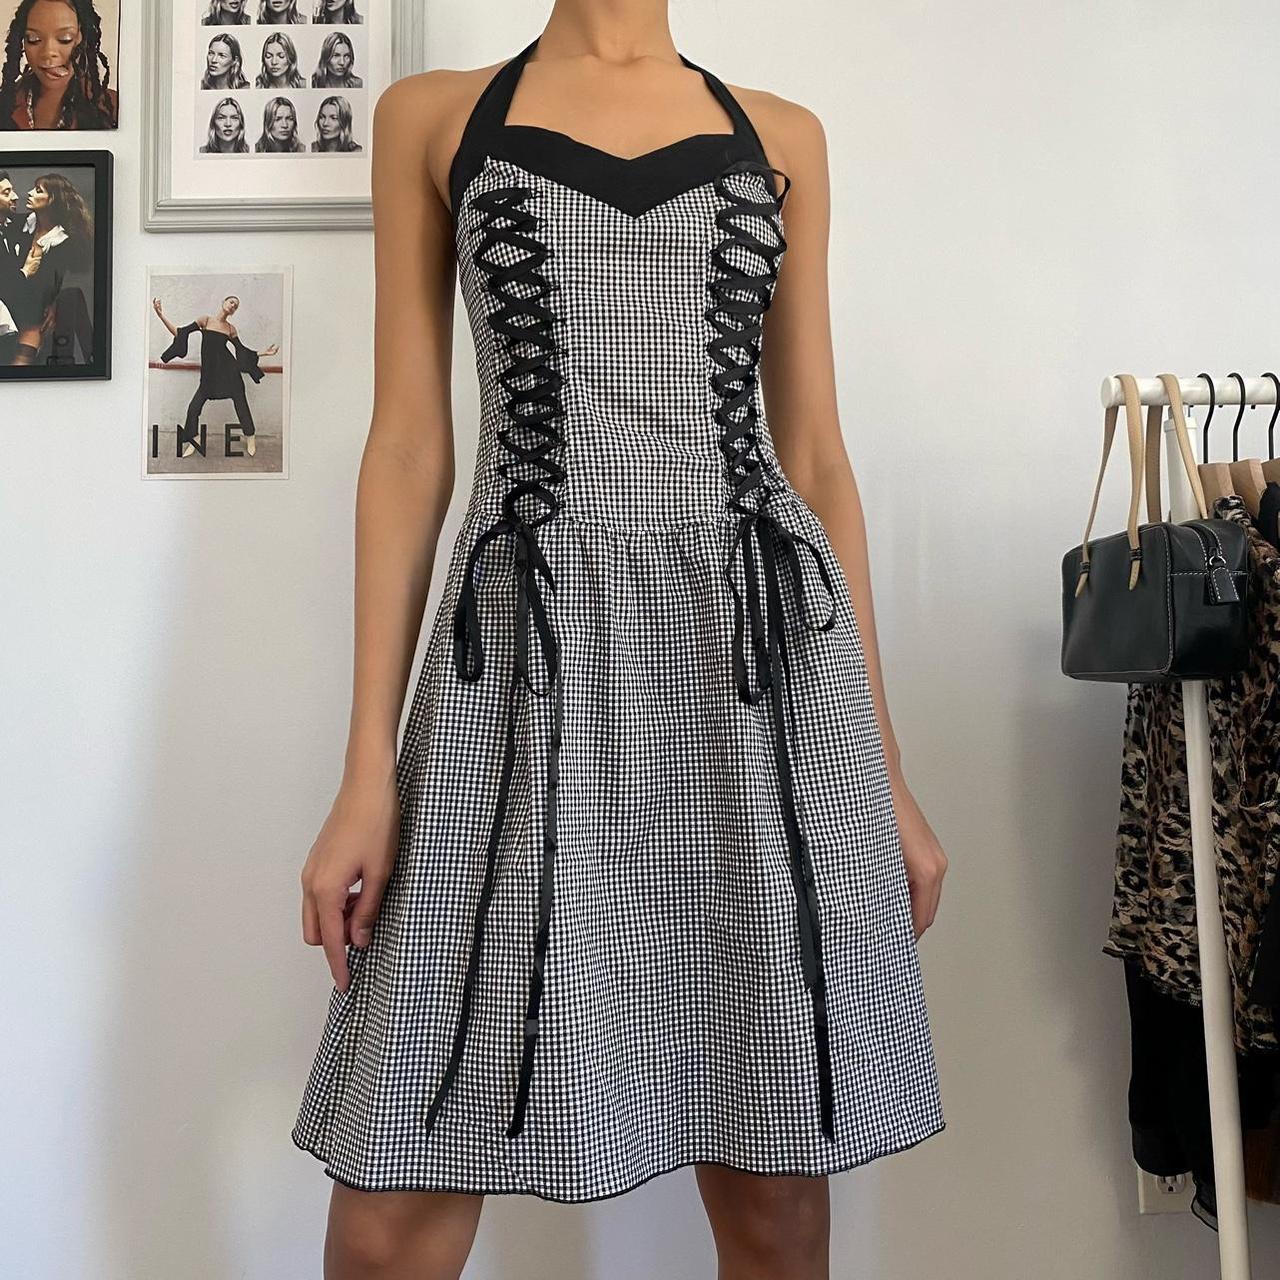 found this lip service dress at a garage sale. help with dating and  pricing? : r/Depop